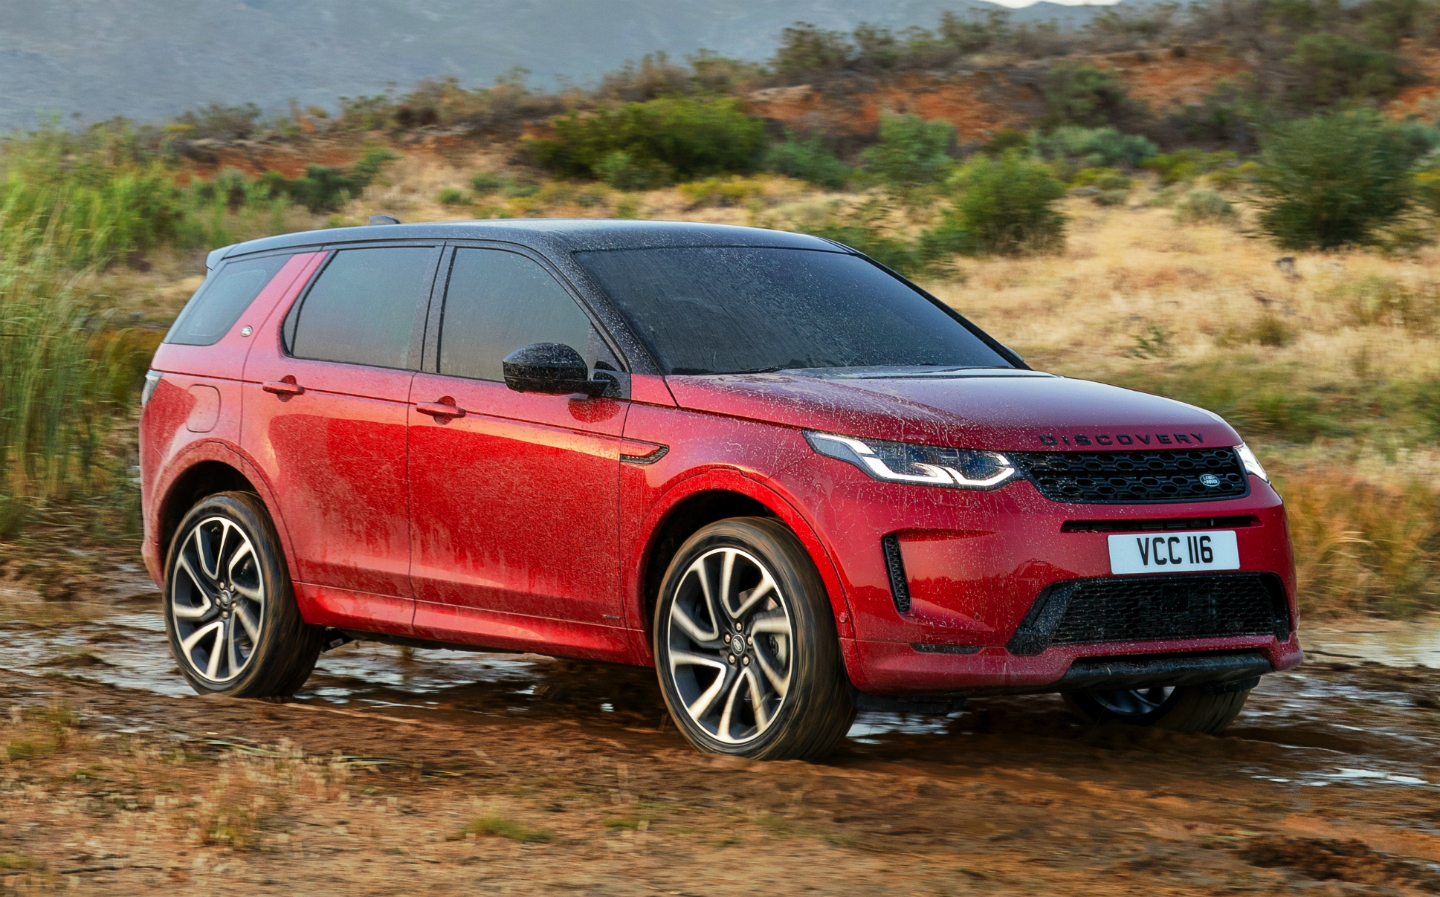 https://www.driving.co.uk/wp-content/uploads/sites/5/2019/10/2019-Land-Rover-Discovery-Sport-facelift-review-10.jpg